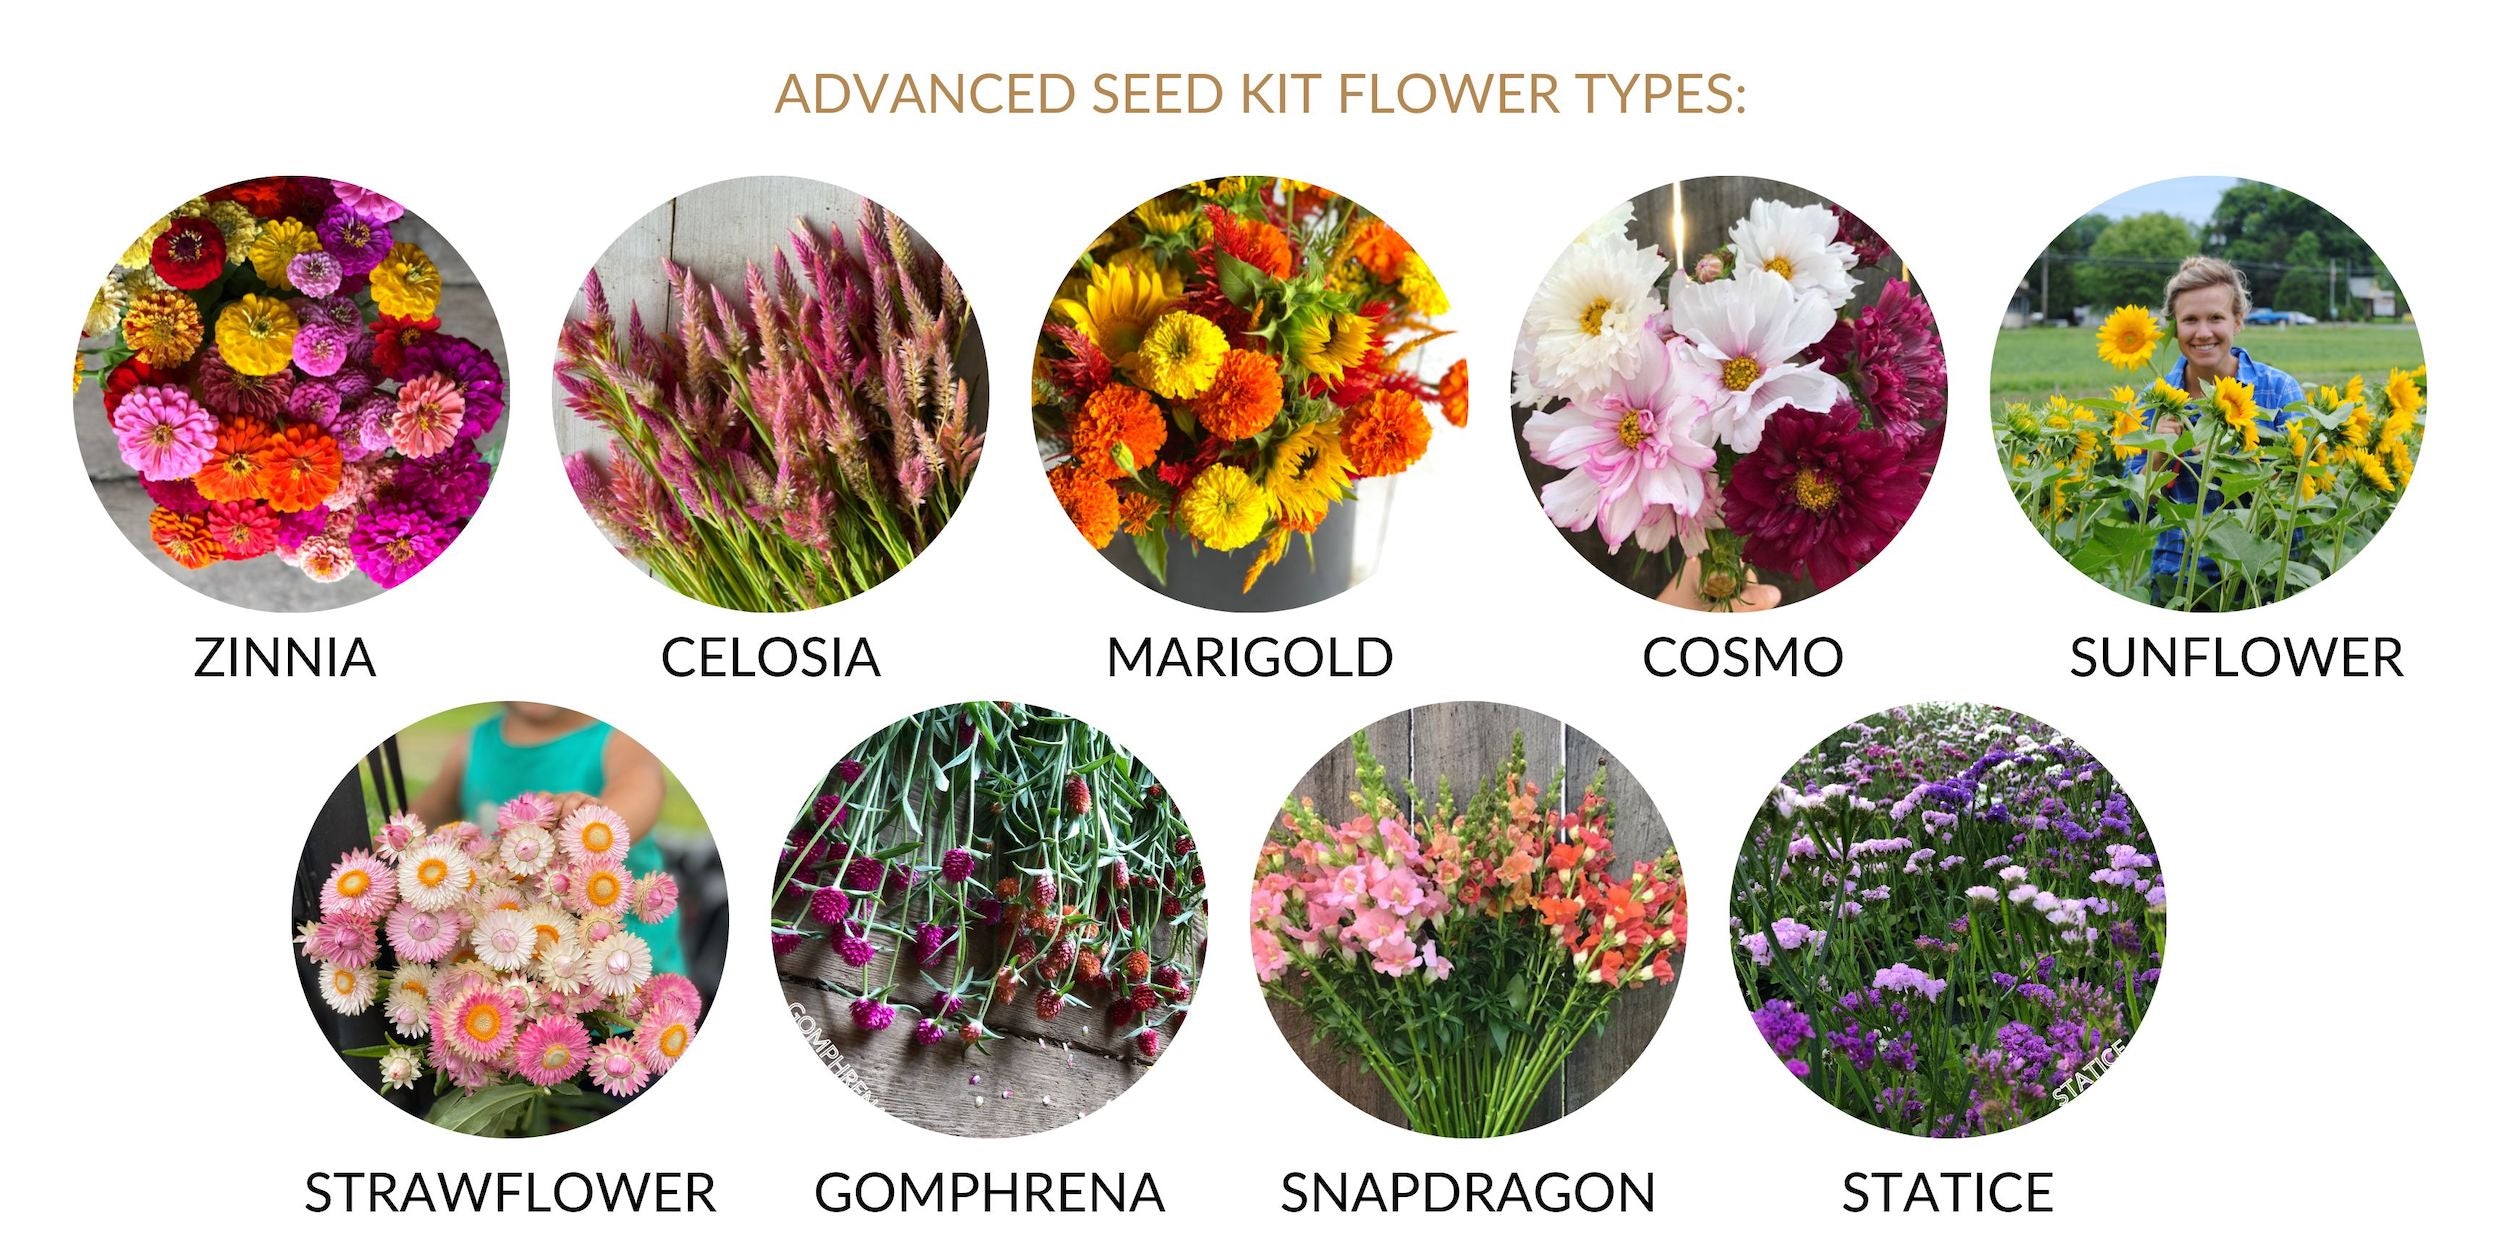 Advanced seed kit seeds include zinnia, celosia, cosmos, marigold, sunflower, snapdragon, gomphrena, statice, and strawflower.